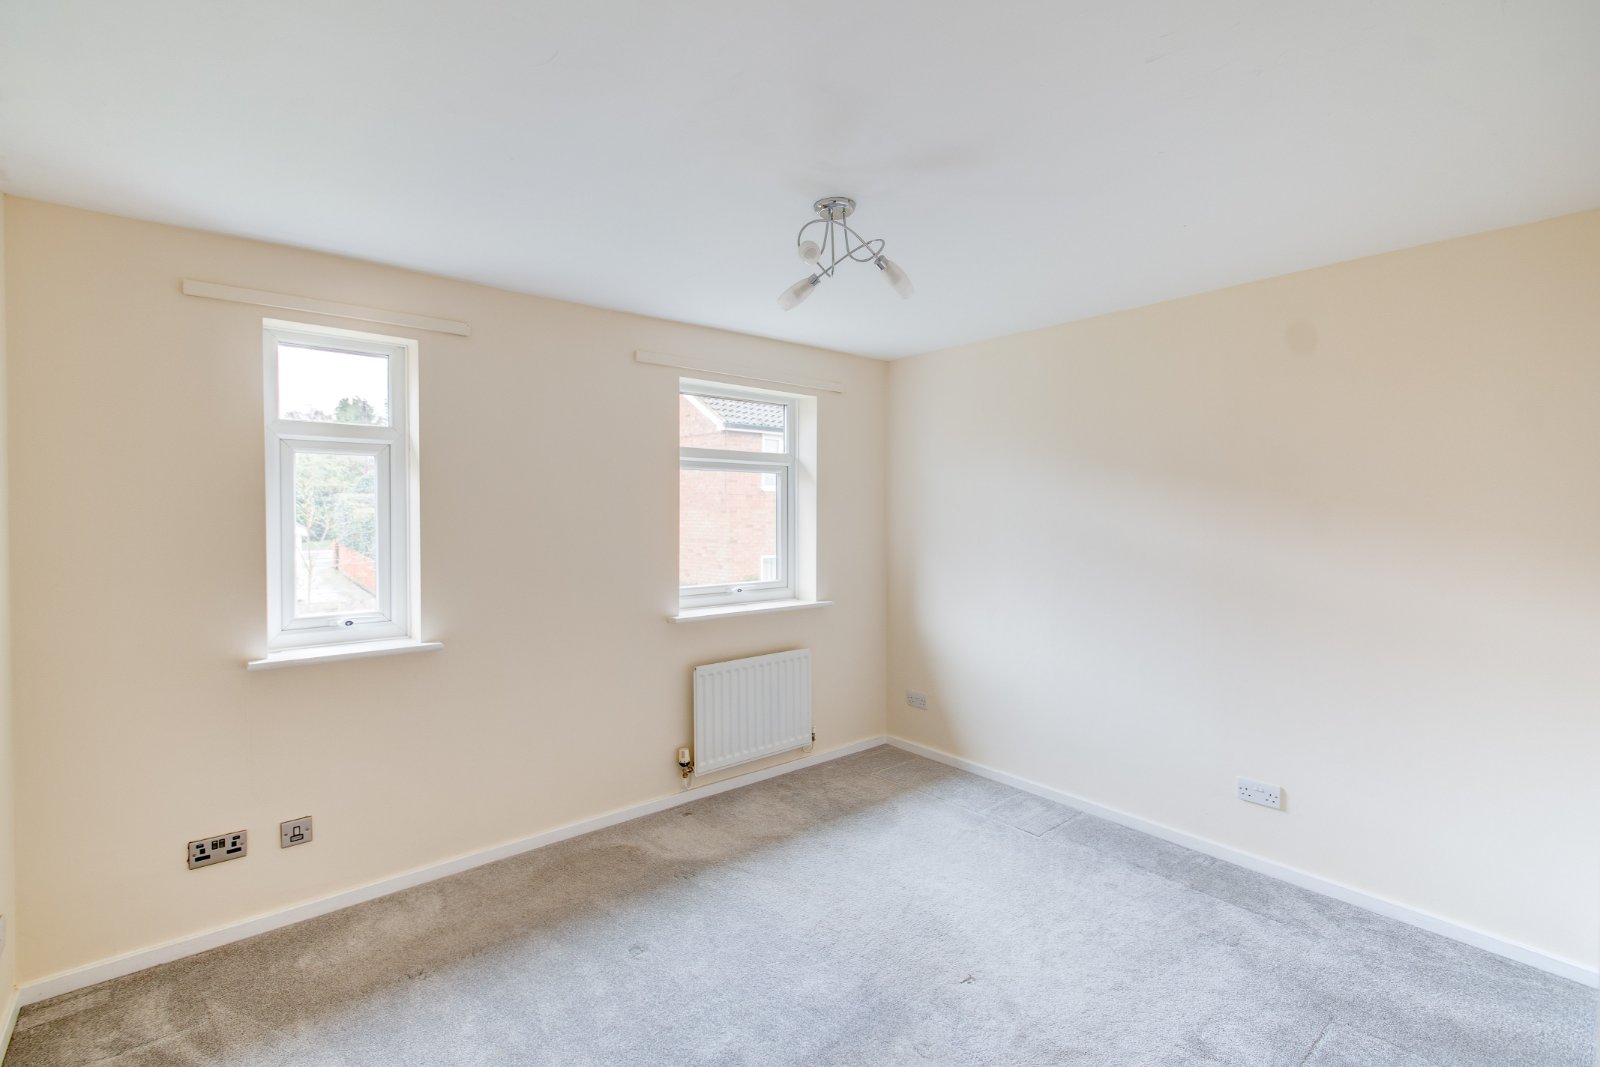 2 bed house to rent in Acorn Road, Catshill  - Property Image 6